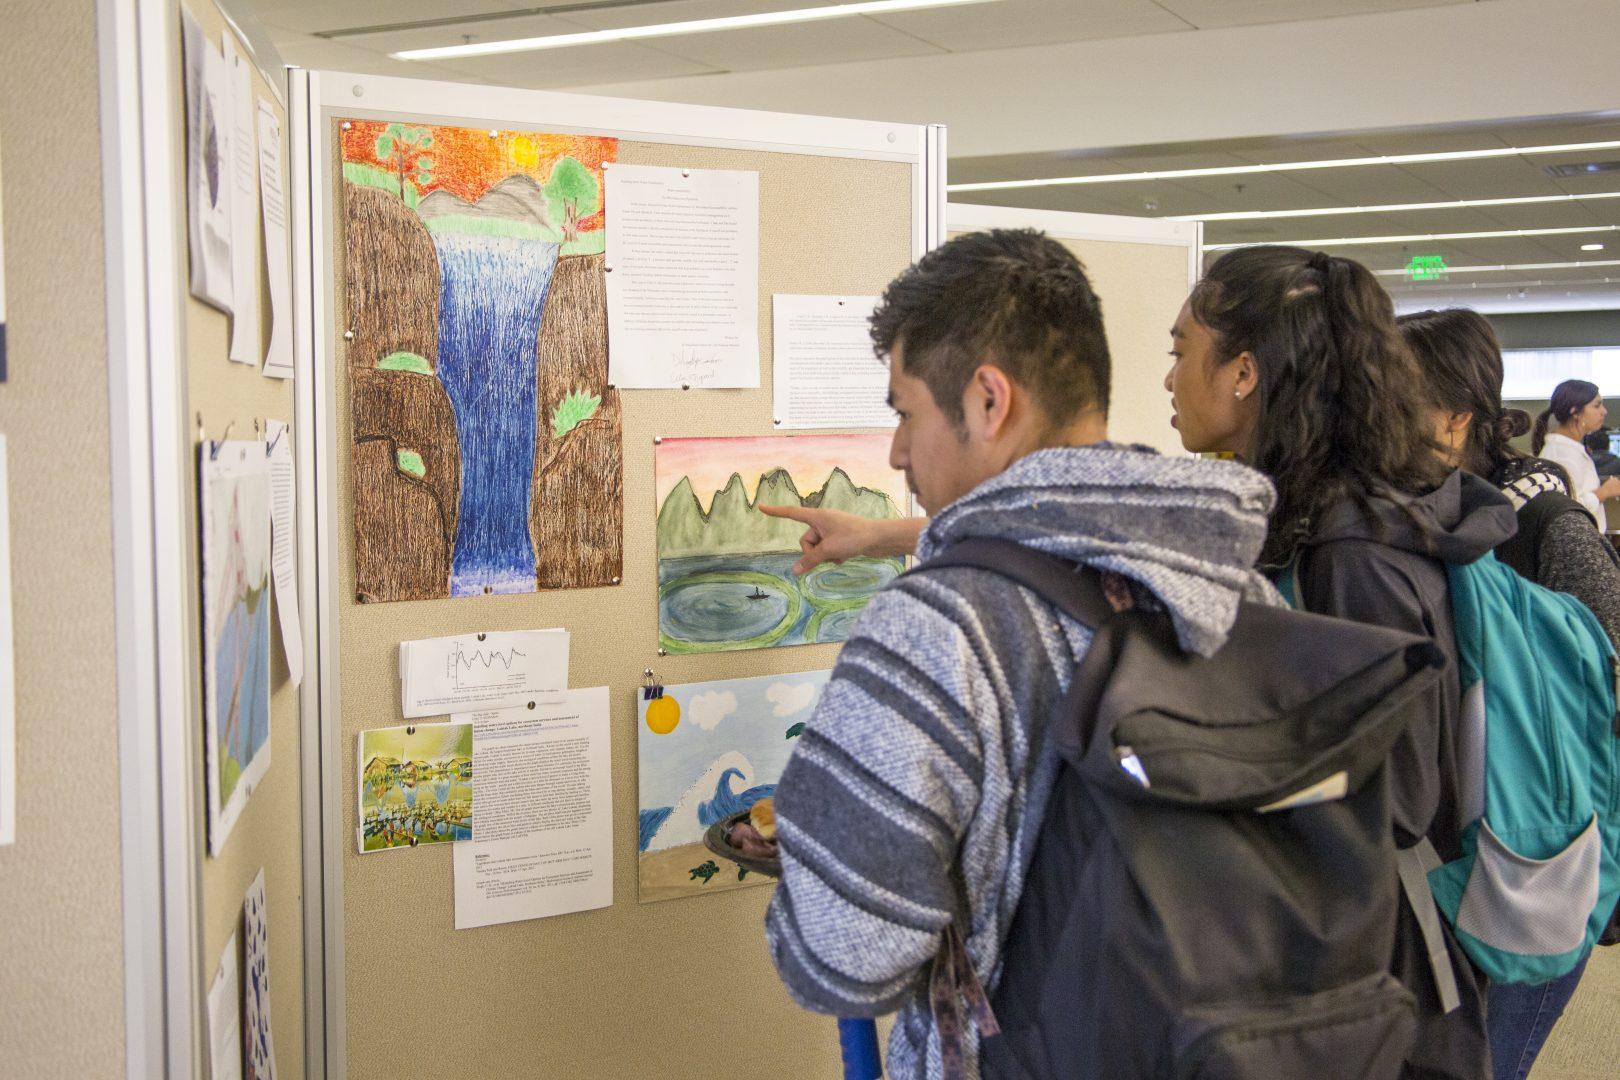 Fresno State students examine projects during the 4th annual interdisciplinary research open house in the Henry Madden Library on April 17, 2017.  (Khone Saysamongdy/ The Collegian)